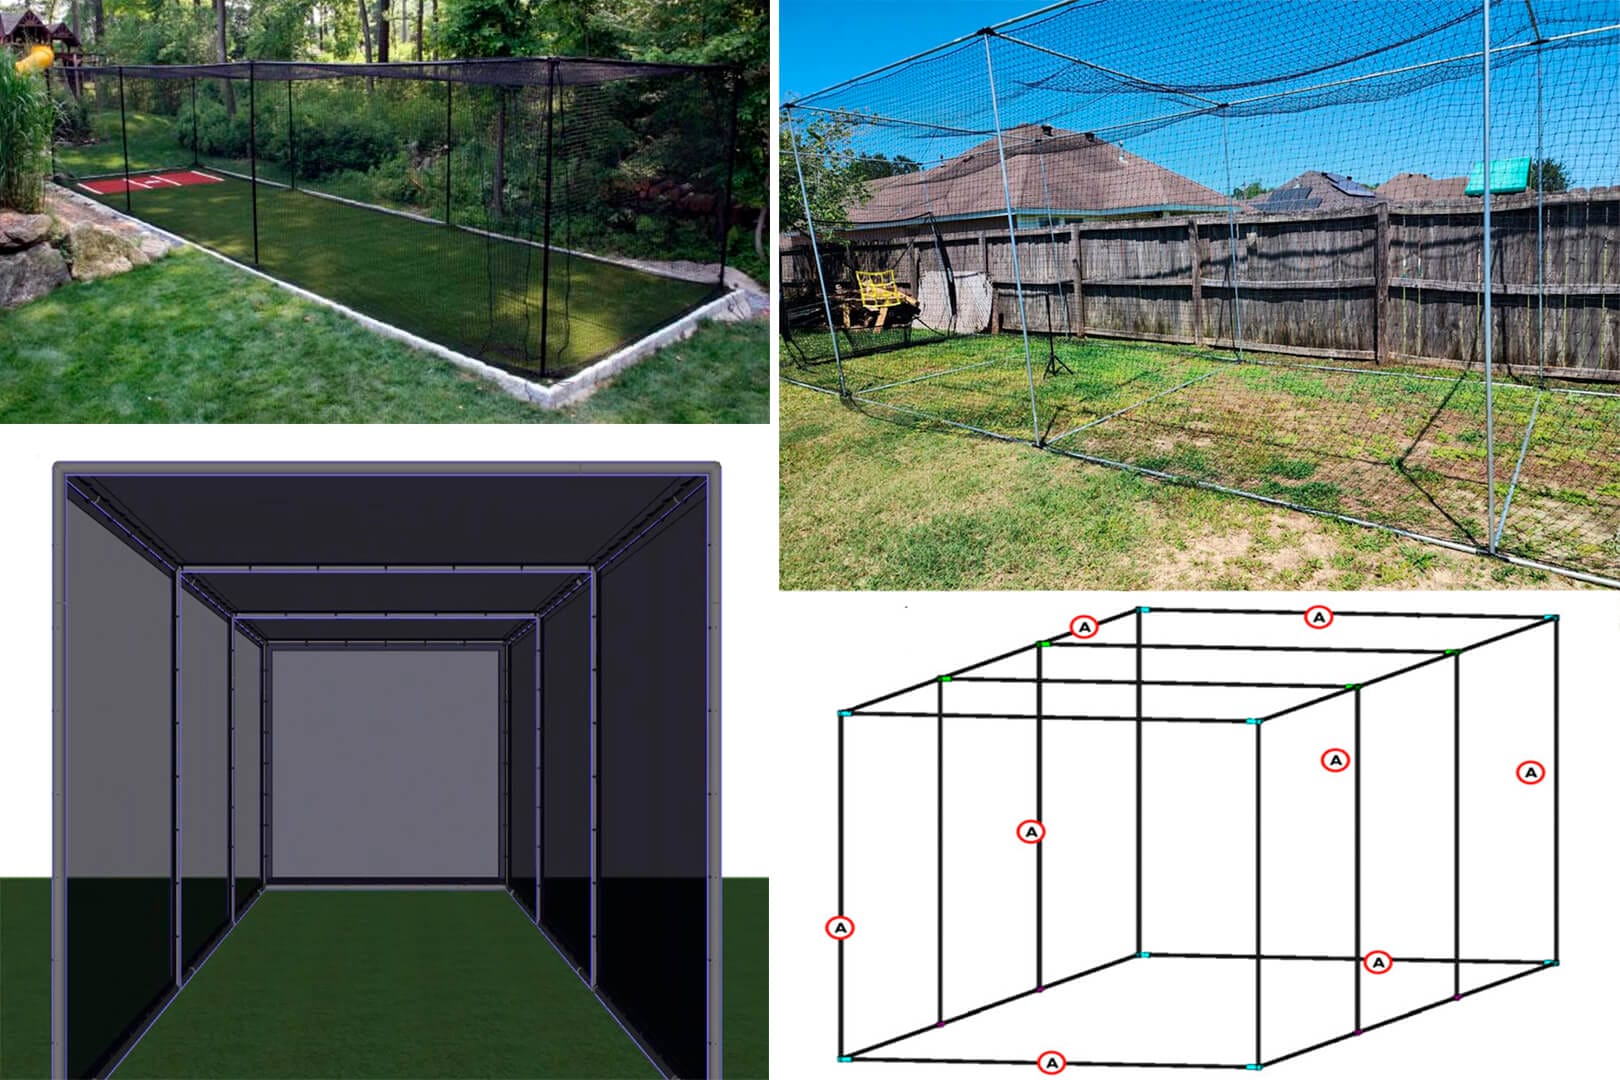 How to Build a Batting Cage for Your Backyard